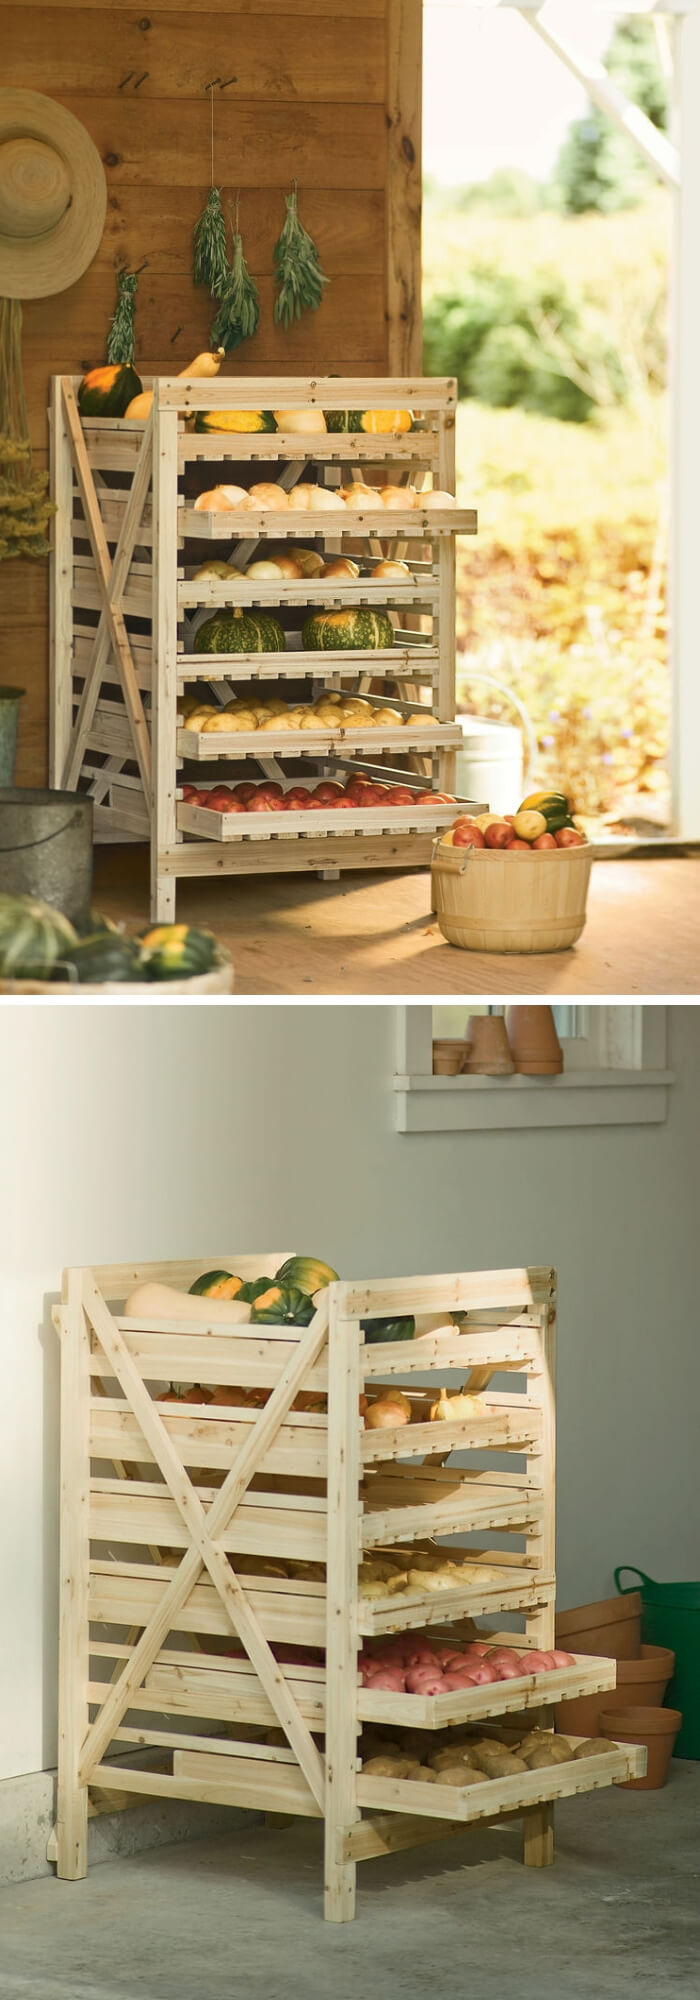 Vegetable Storage Rack | Best Fruit and Vegetable Storage Ideas For Your Kitchen